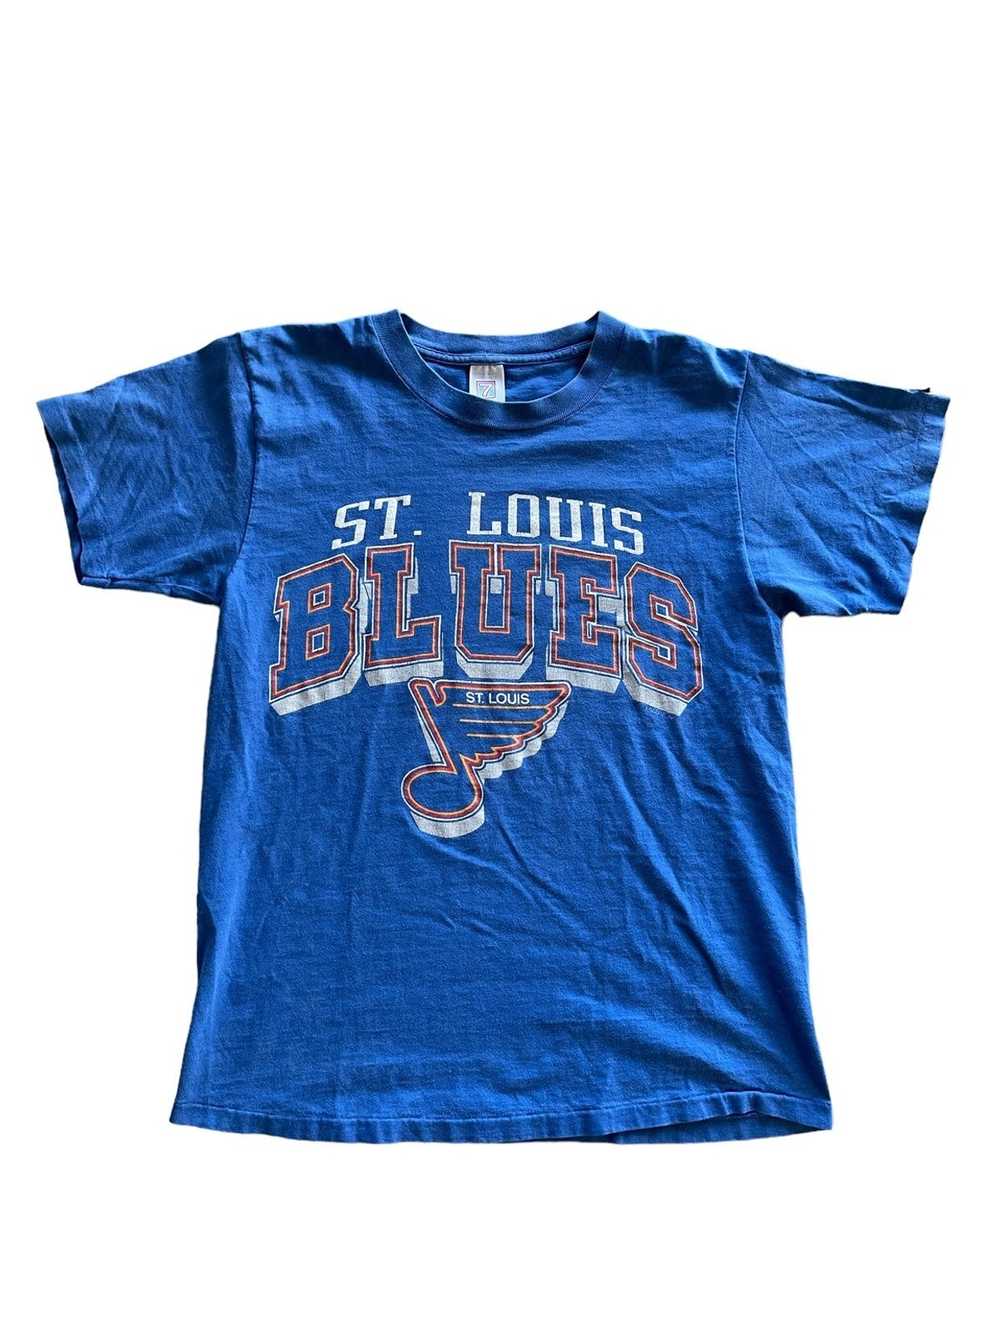 Mitchell & Ness St. Louis Blues Distressed Logo Gold T-Shirt, Men's, Large